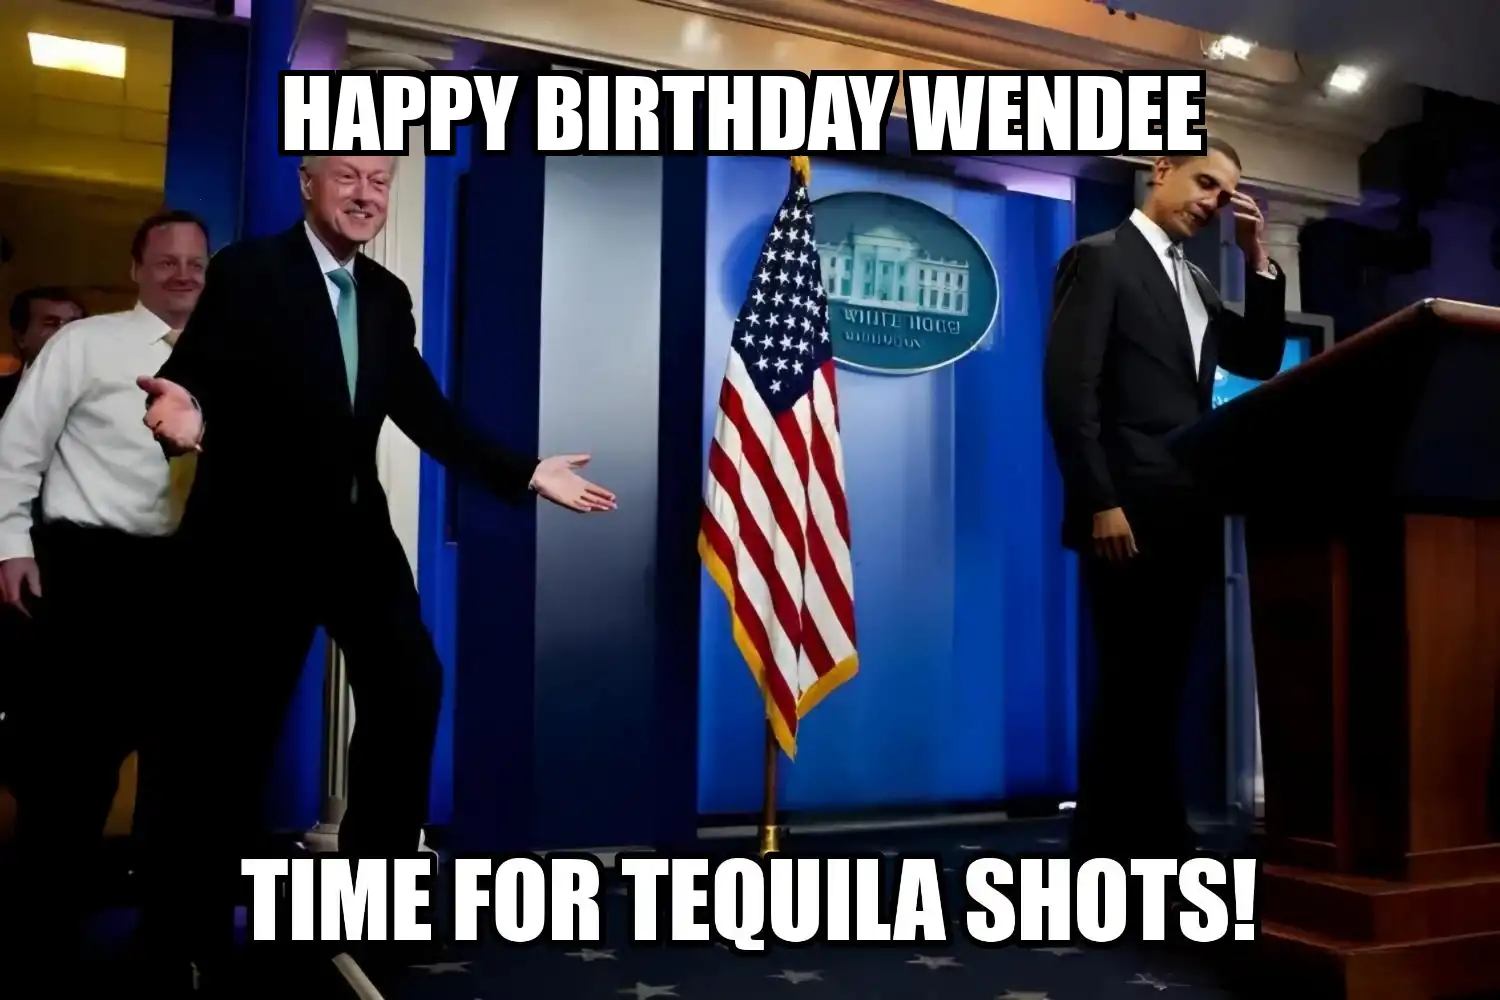 Happy Birthday Wendee Time For Tequila Shots Memes